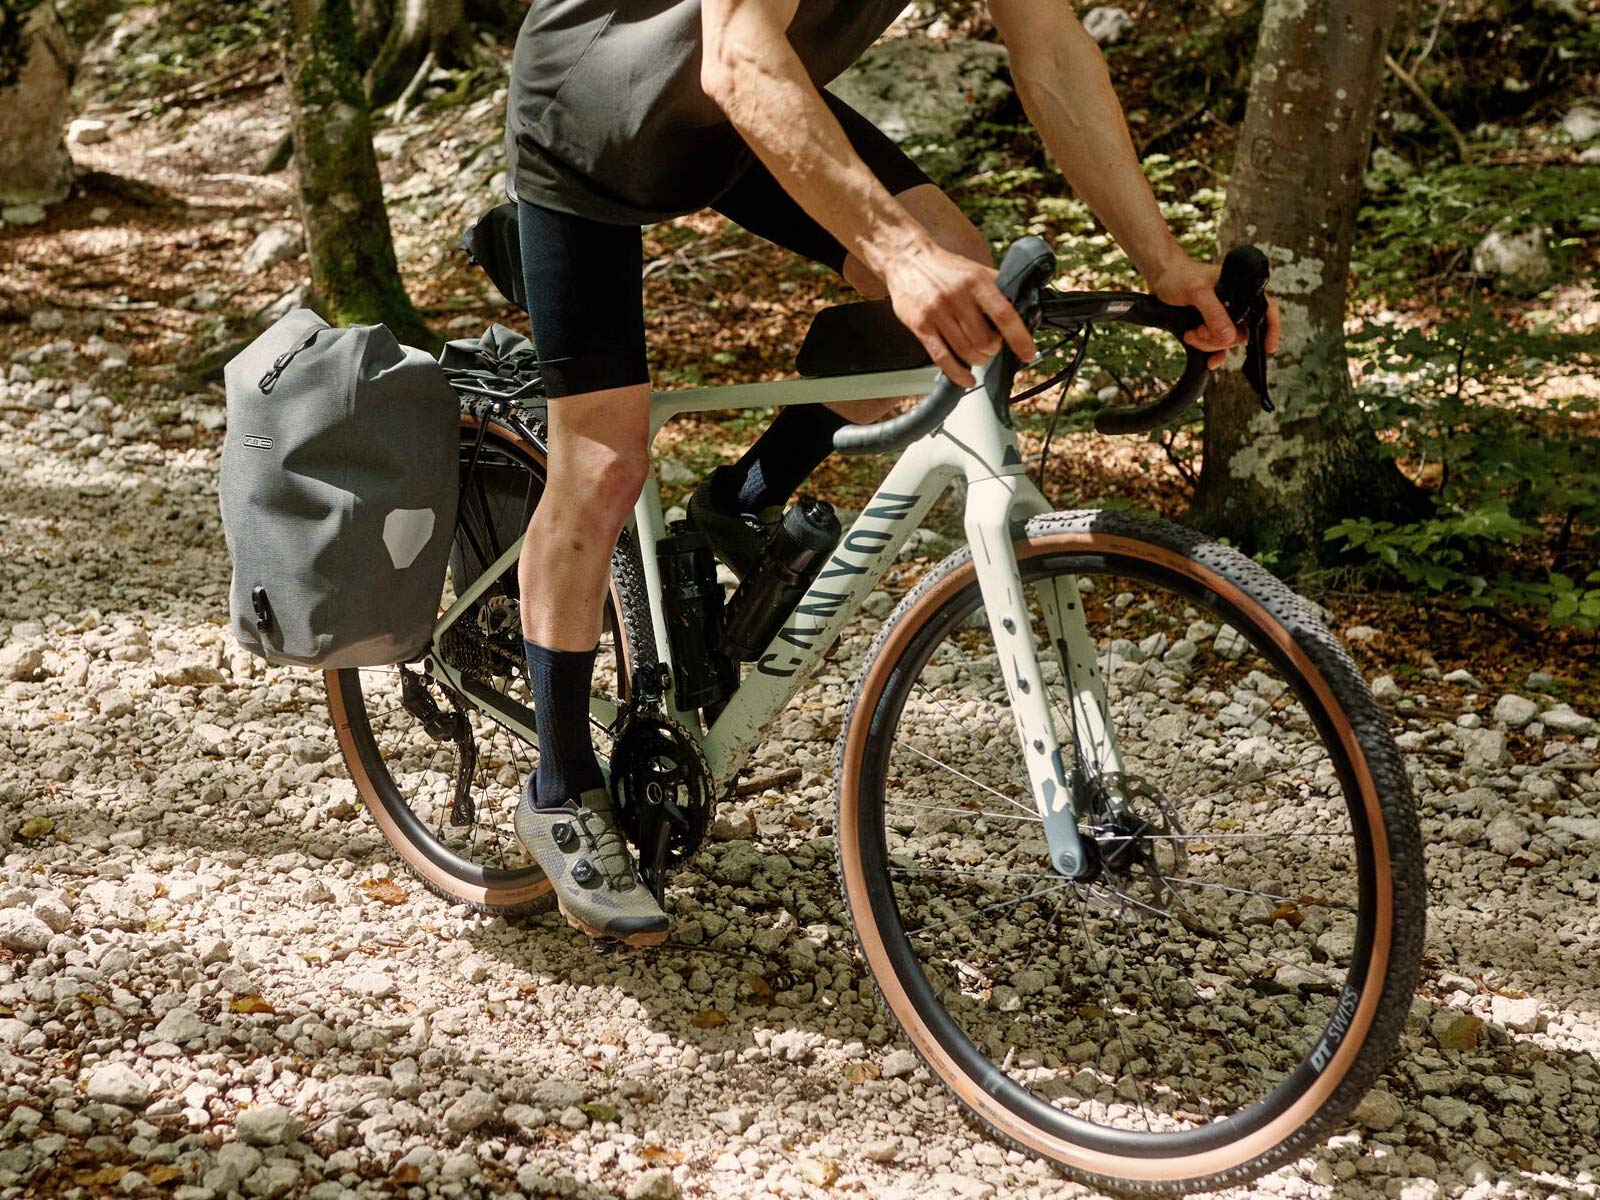 Canyon Grizl AL affordable alloy adventure gravel bike, photo by Marco Freudenreich, riding off-road